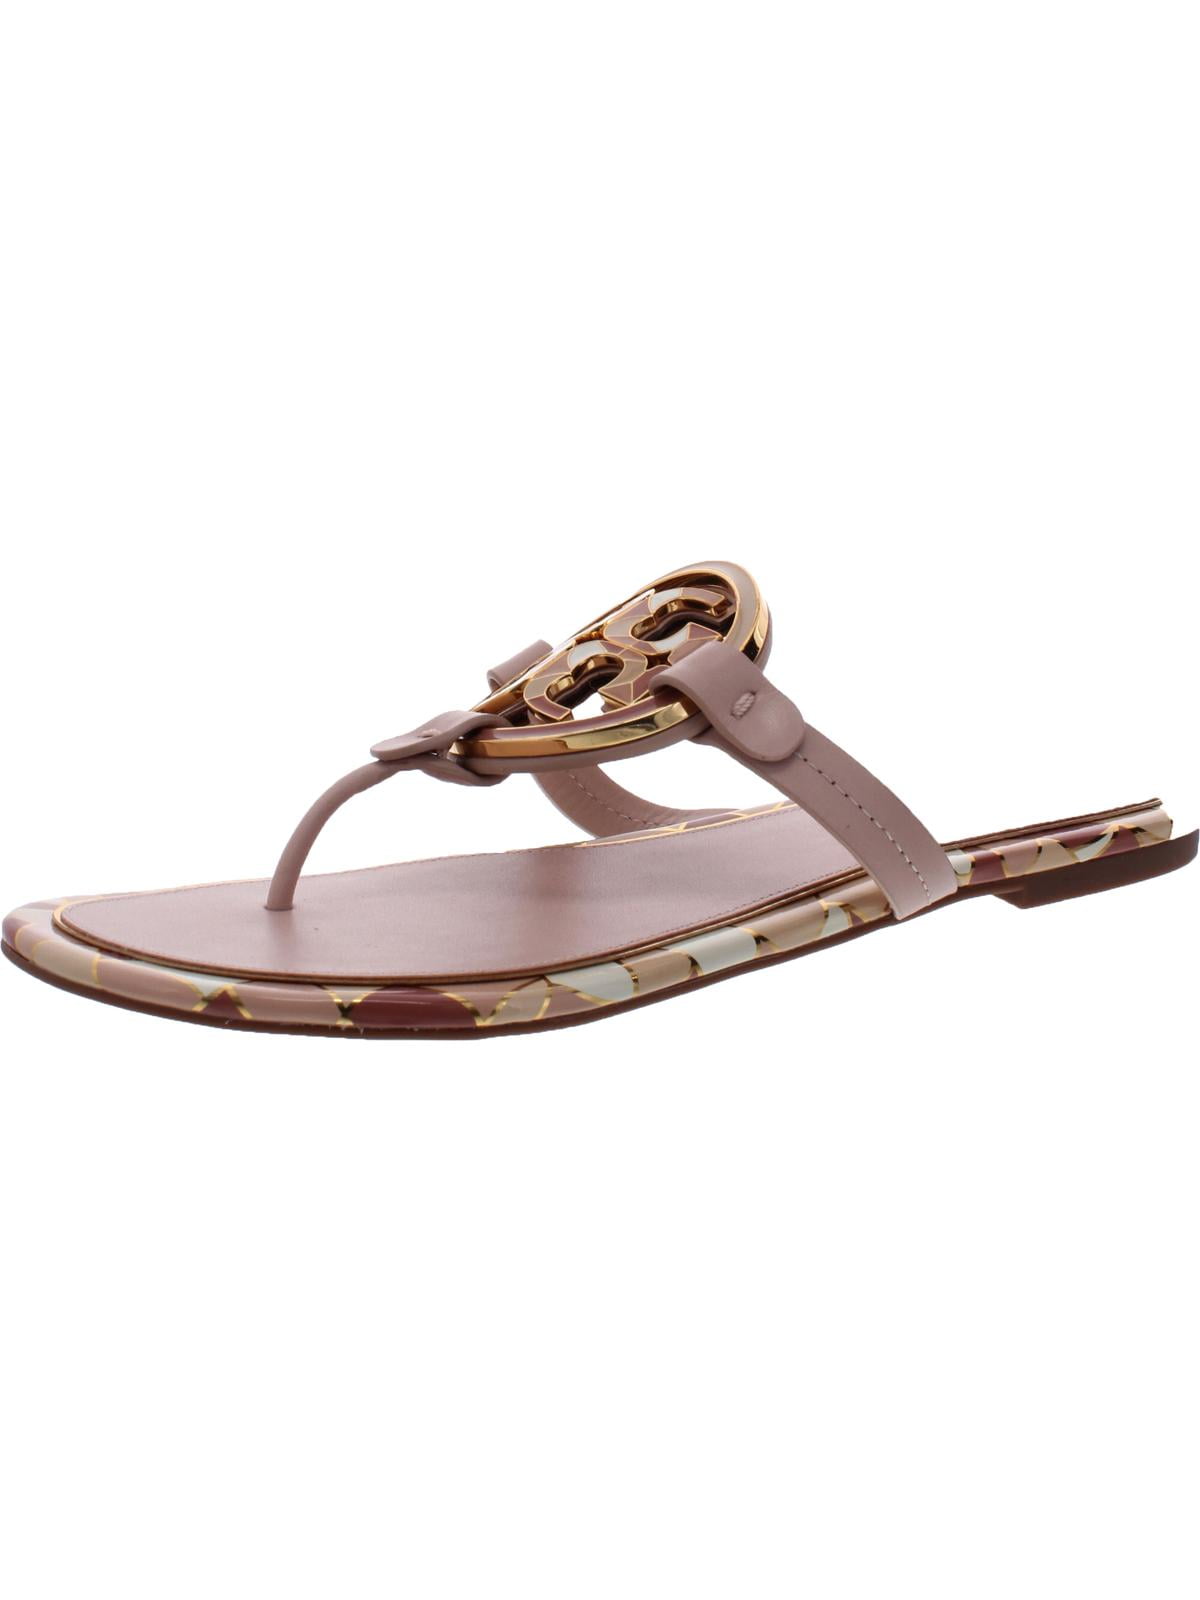 Tory Burch Womens Enamel Miller Leather T-Strap Thong Sandals 